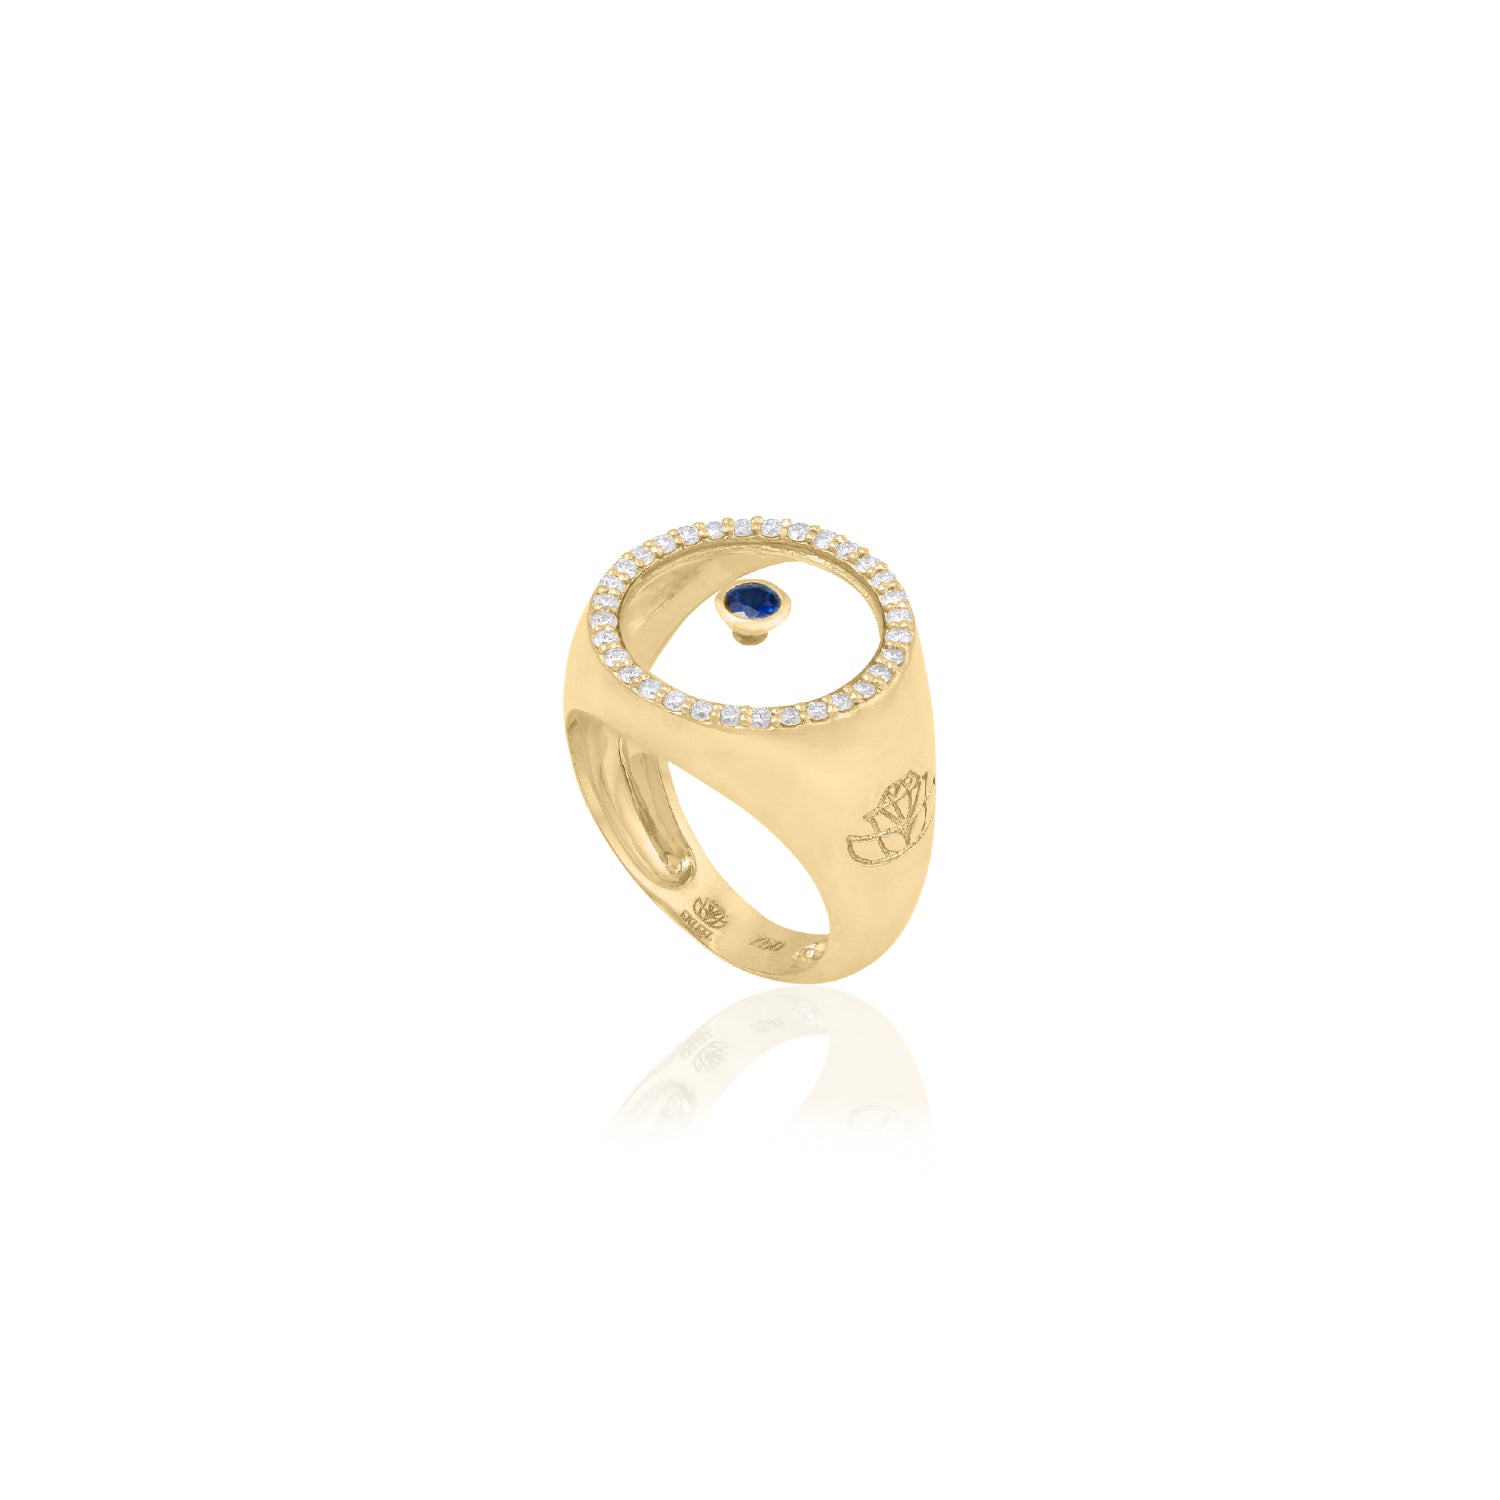 Sapphire September Birthstone Ring in Yellow Gold